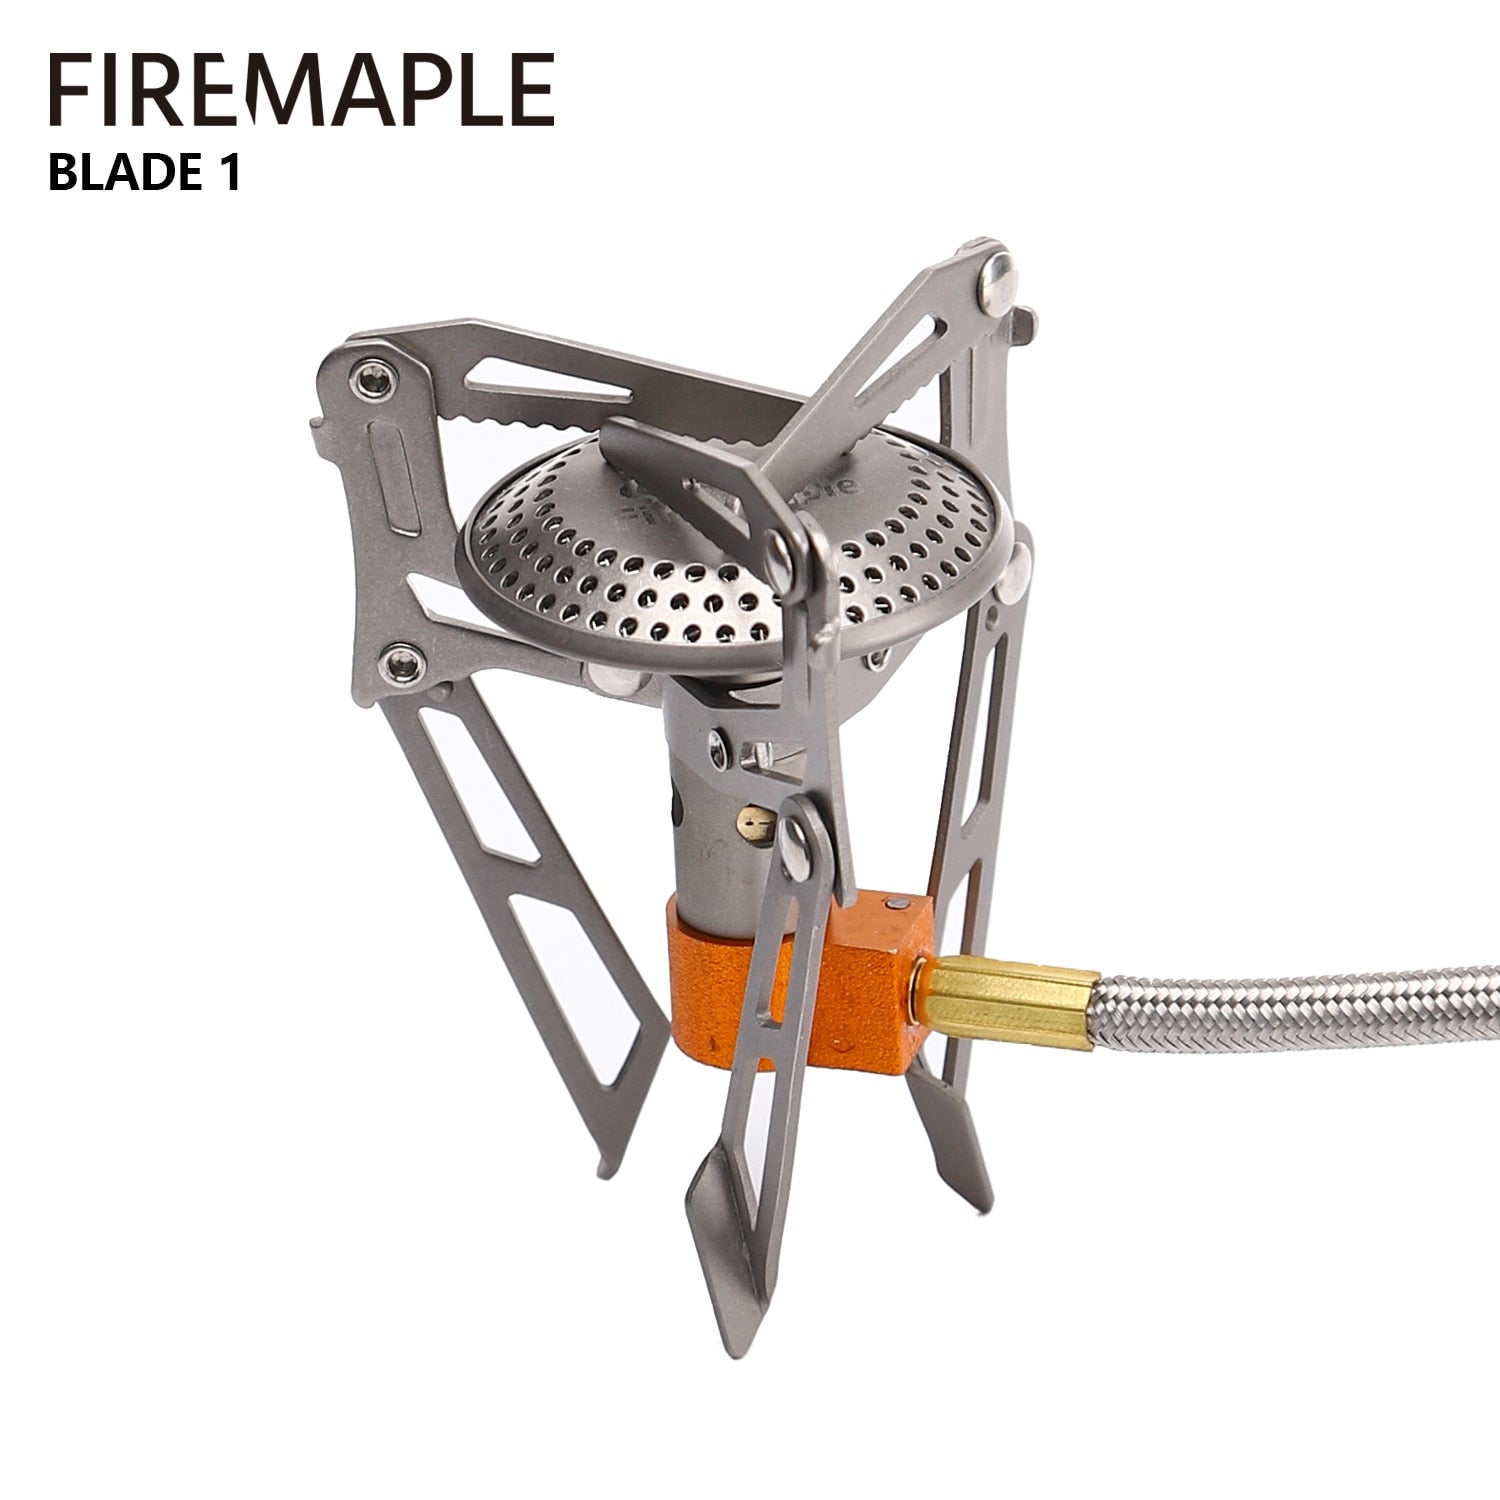 Fire Maple Titanium Stove FMS-117T Ultralight Outdoor Camping Hiking Stoves Lightweight Travel Gas Furnace Portable Gas Burners